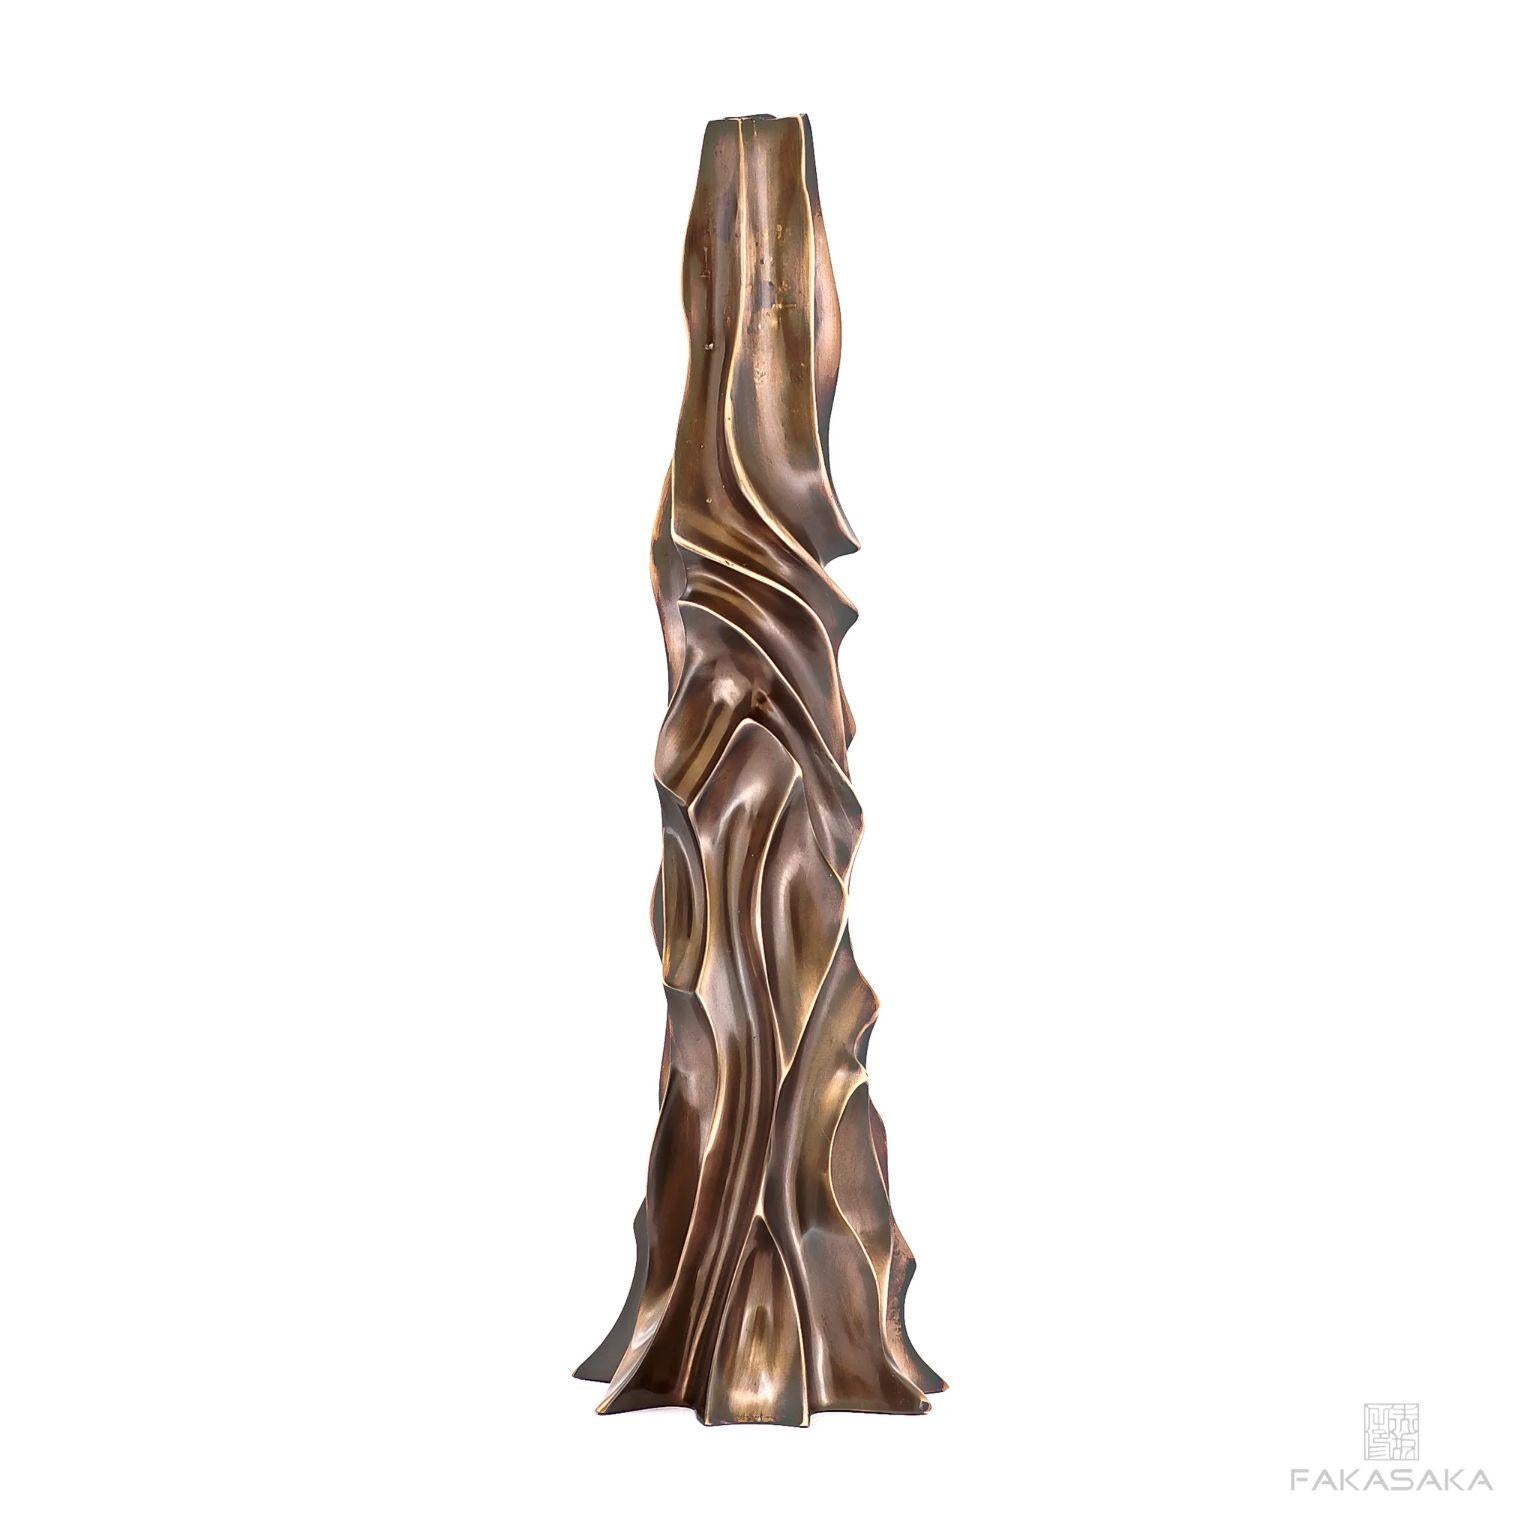 Apple candleholder by Fakasaka design
Dimensions: W 13.5 cm D 13.5 cm H 41.5.
Materials: dark bronze.
Also available in polished bronze. 

 Fakasaka is a design company focused on production of high-end furniture, lighting, decorative objects,